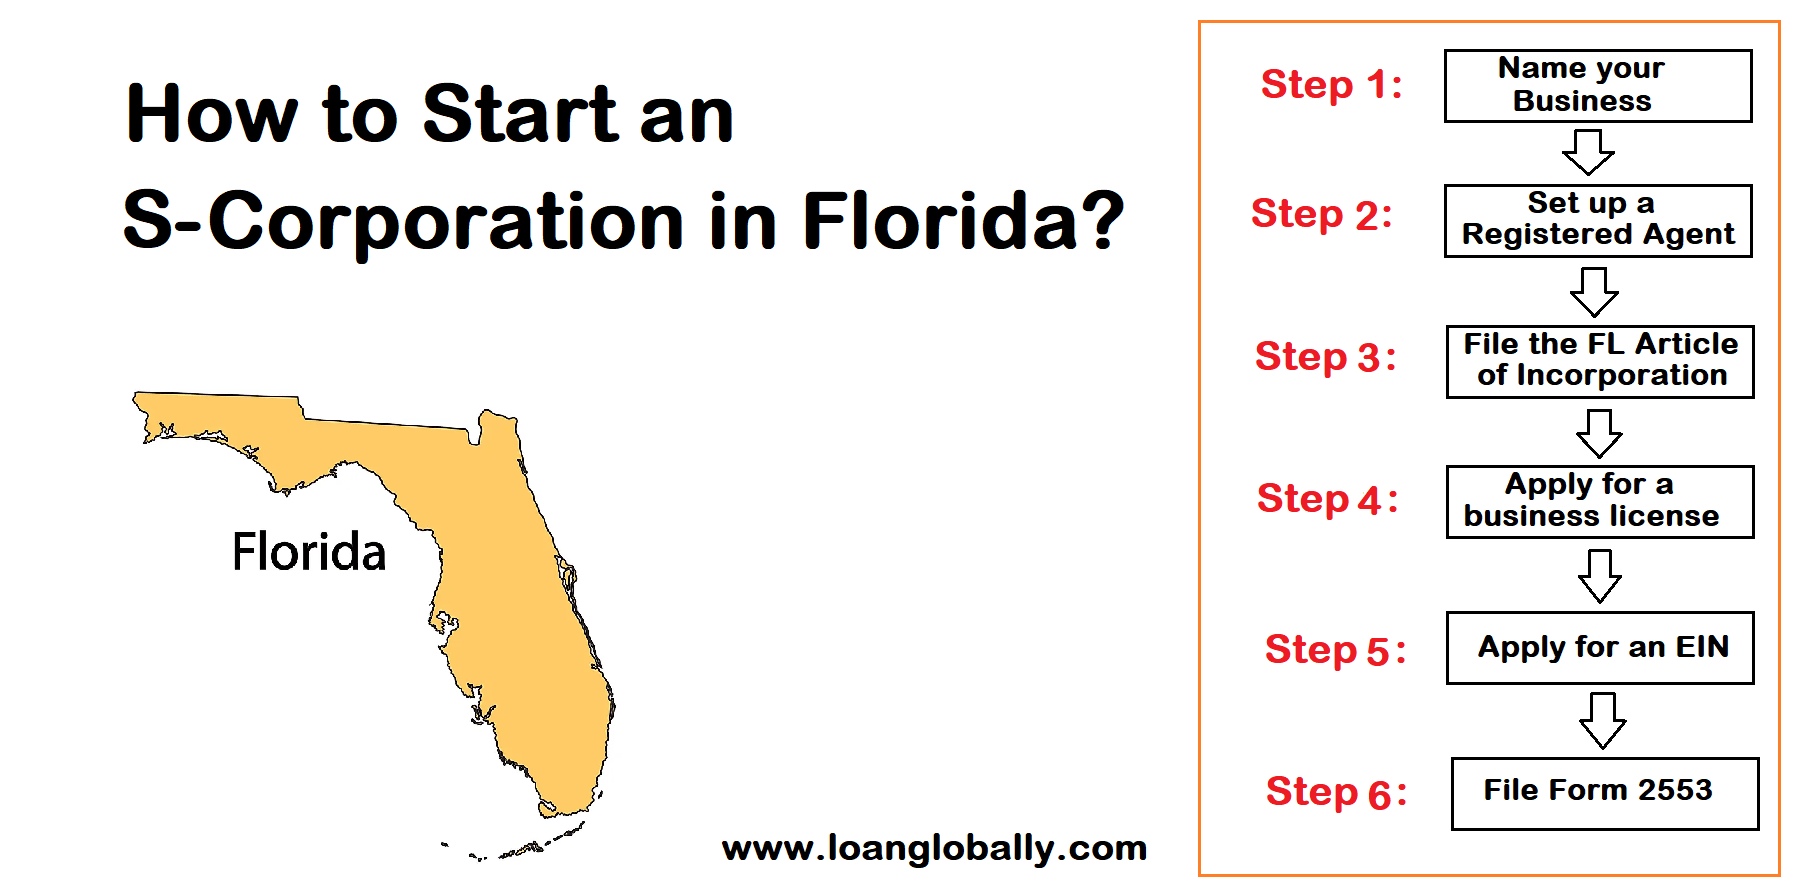 How to Start an S-Corporation in Florida